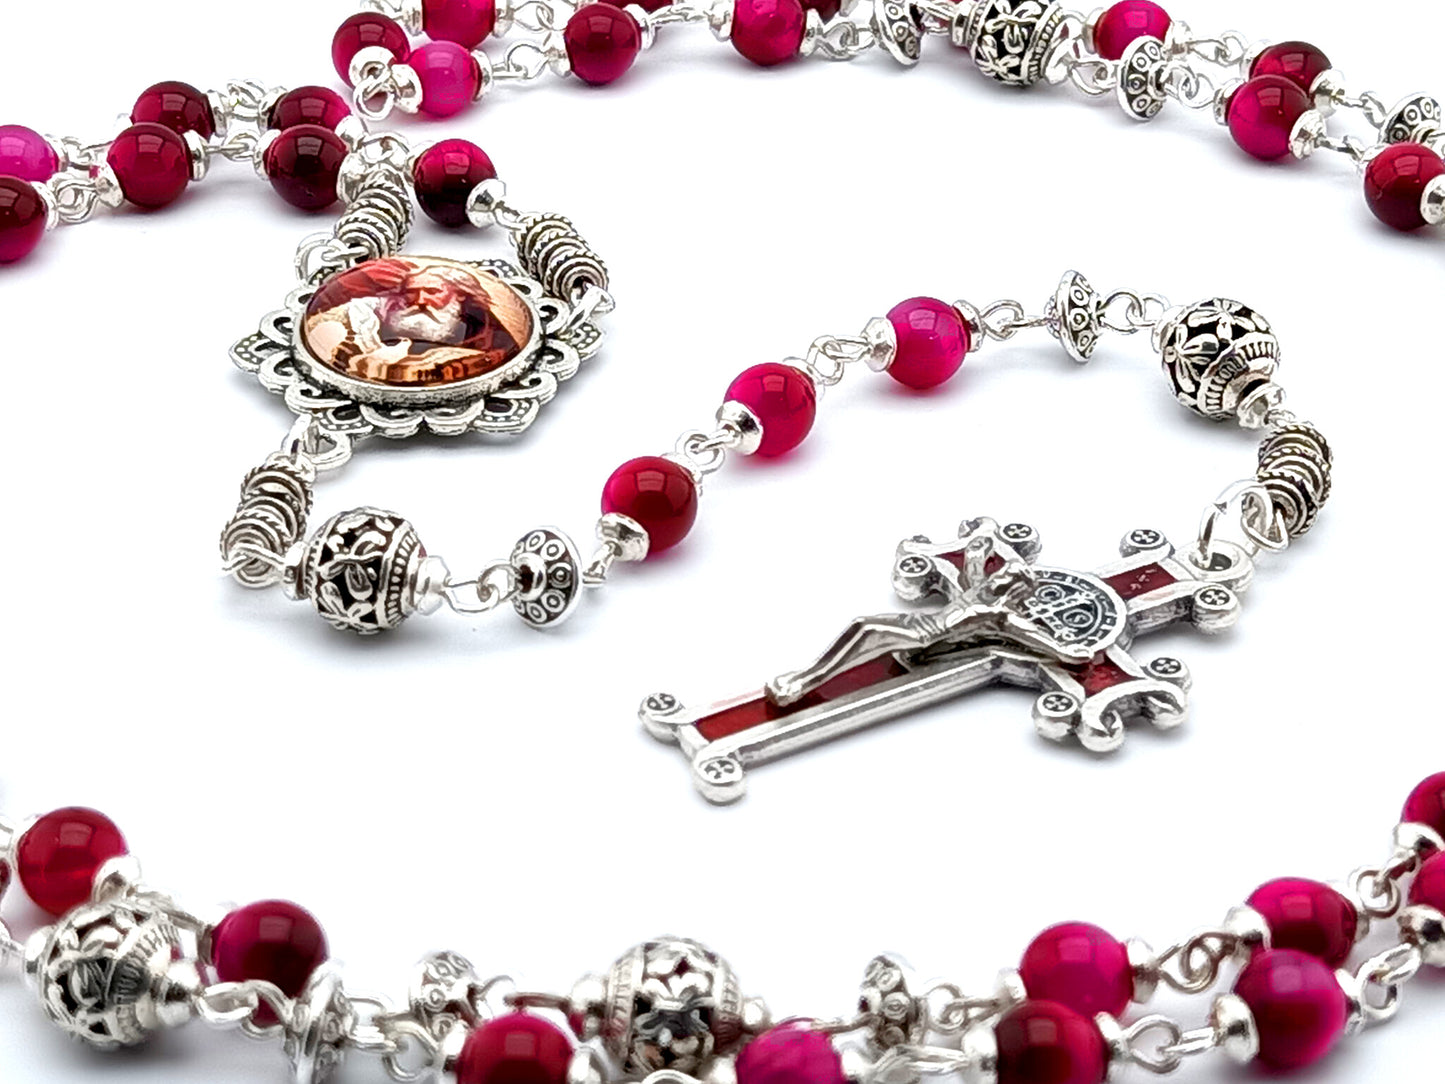 Holy Trinity unique rosary beads with pink tigers eye gemstone beads, silver pater beads, silver and red enamel Saint Benedict crucifix and picture centre medal.